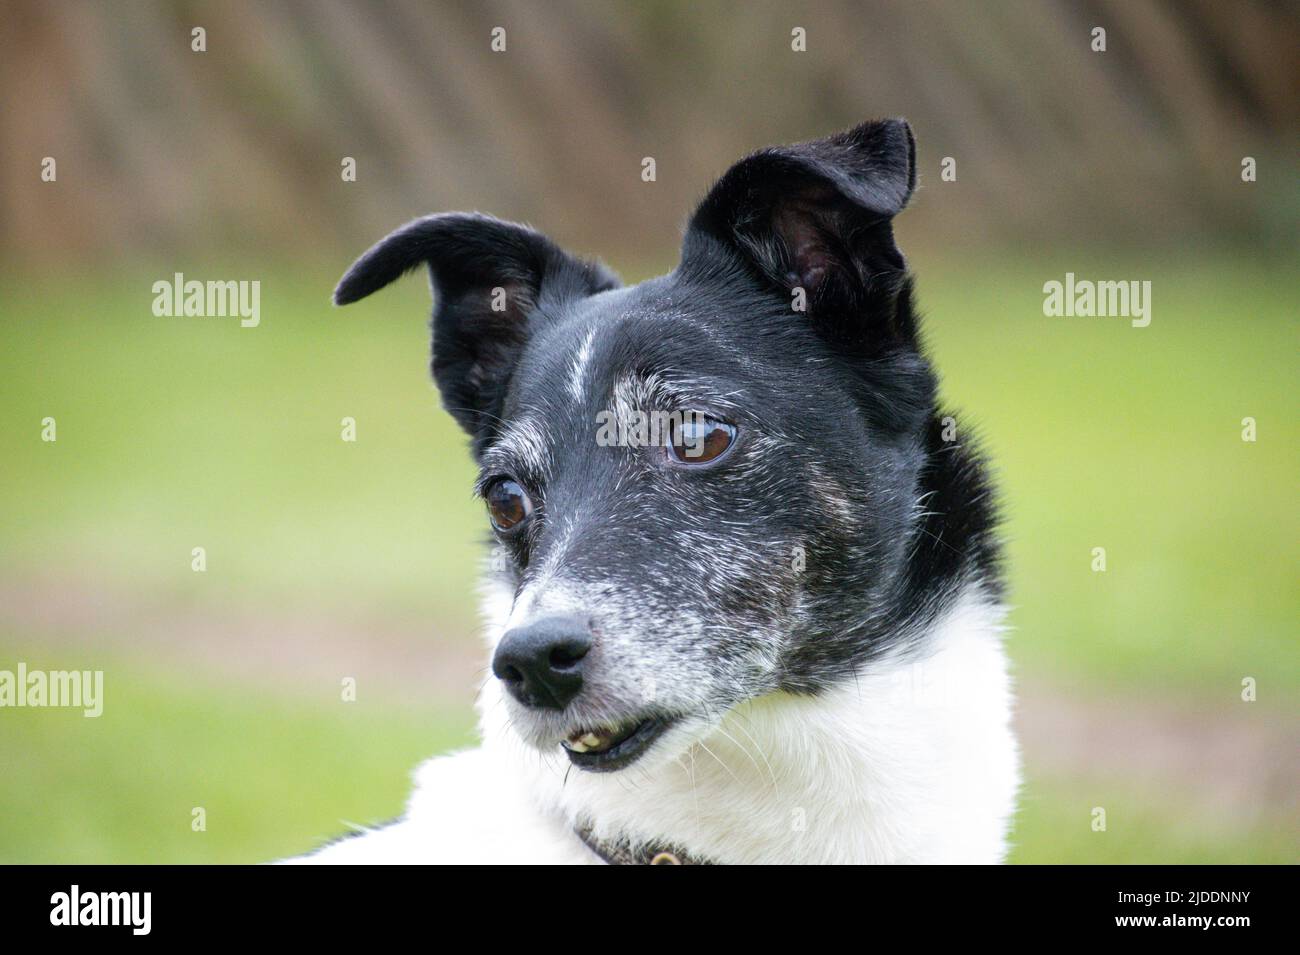 A portrait of a aging white Jack Russell with a black head with grey running through its face marking the years passing by staring to the side Stock Photo